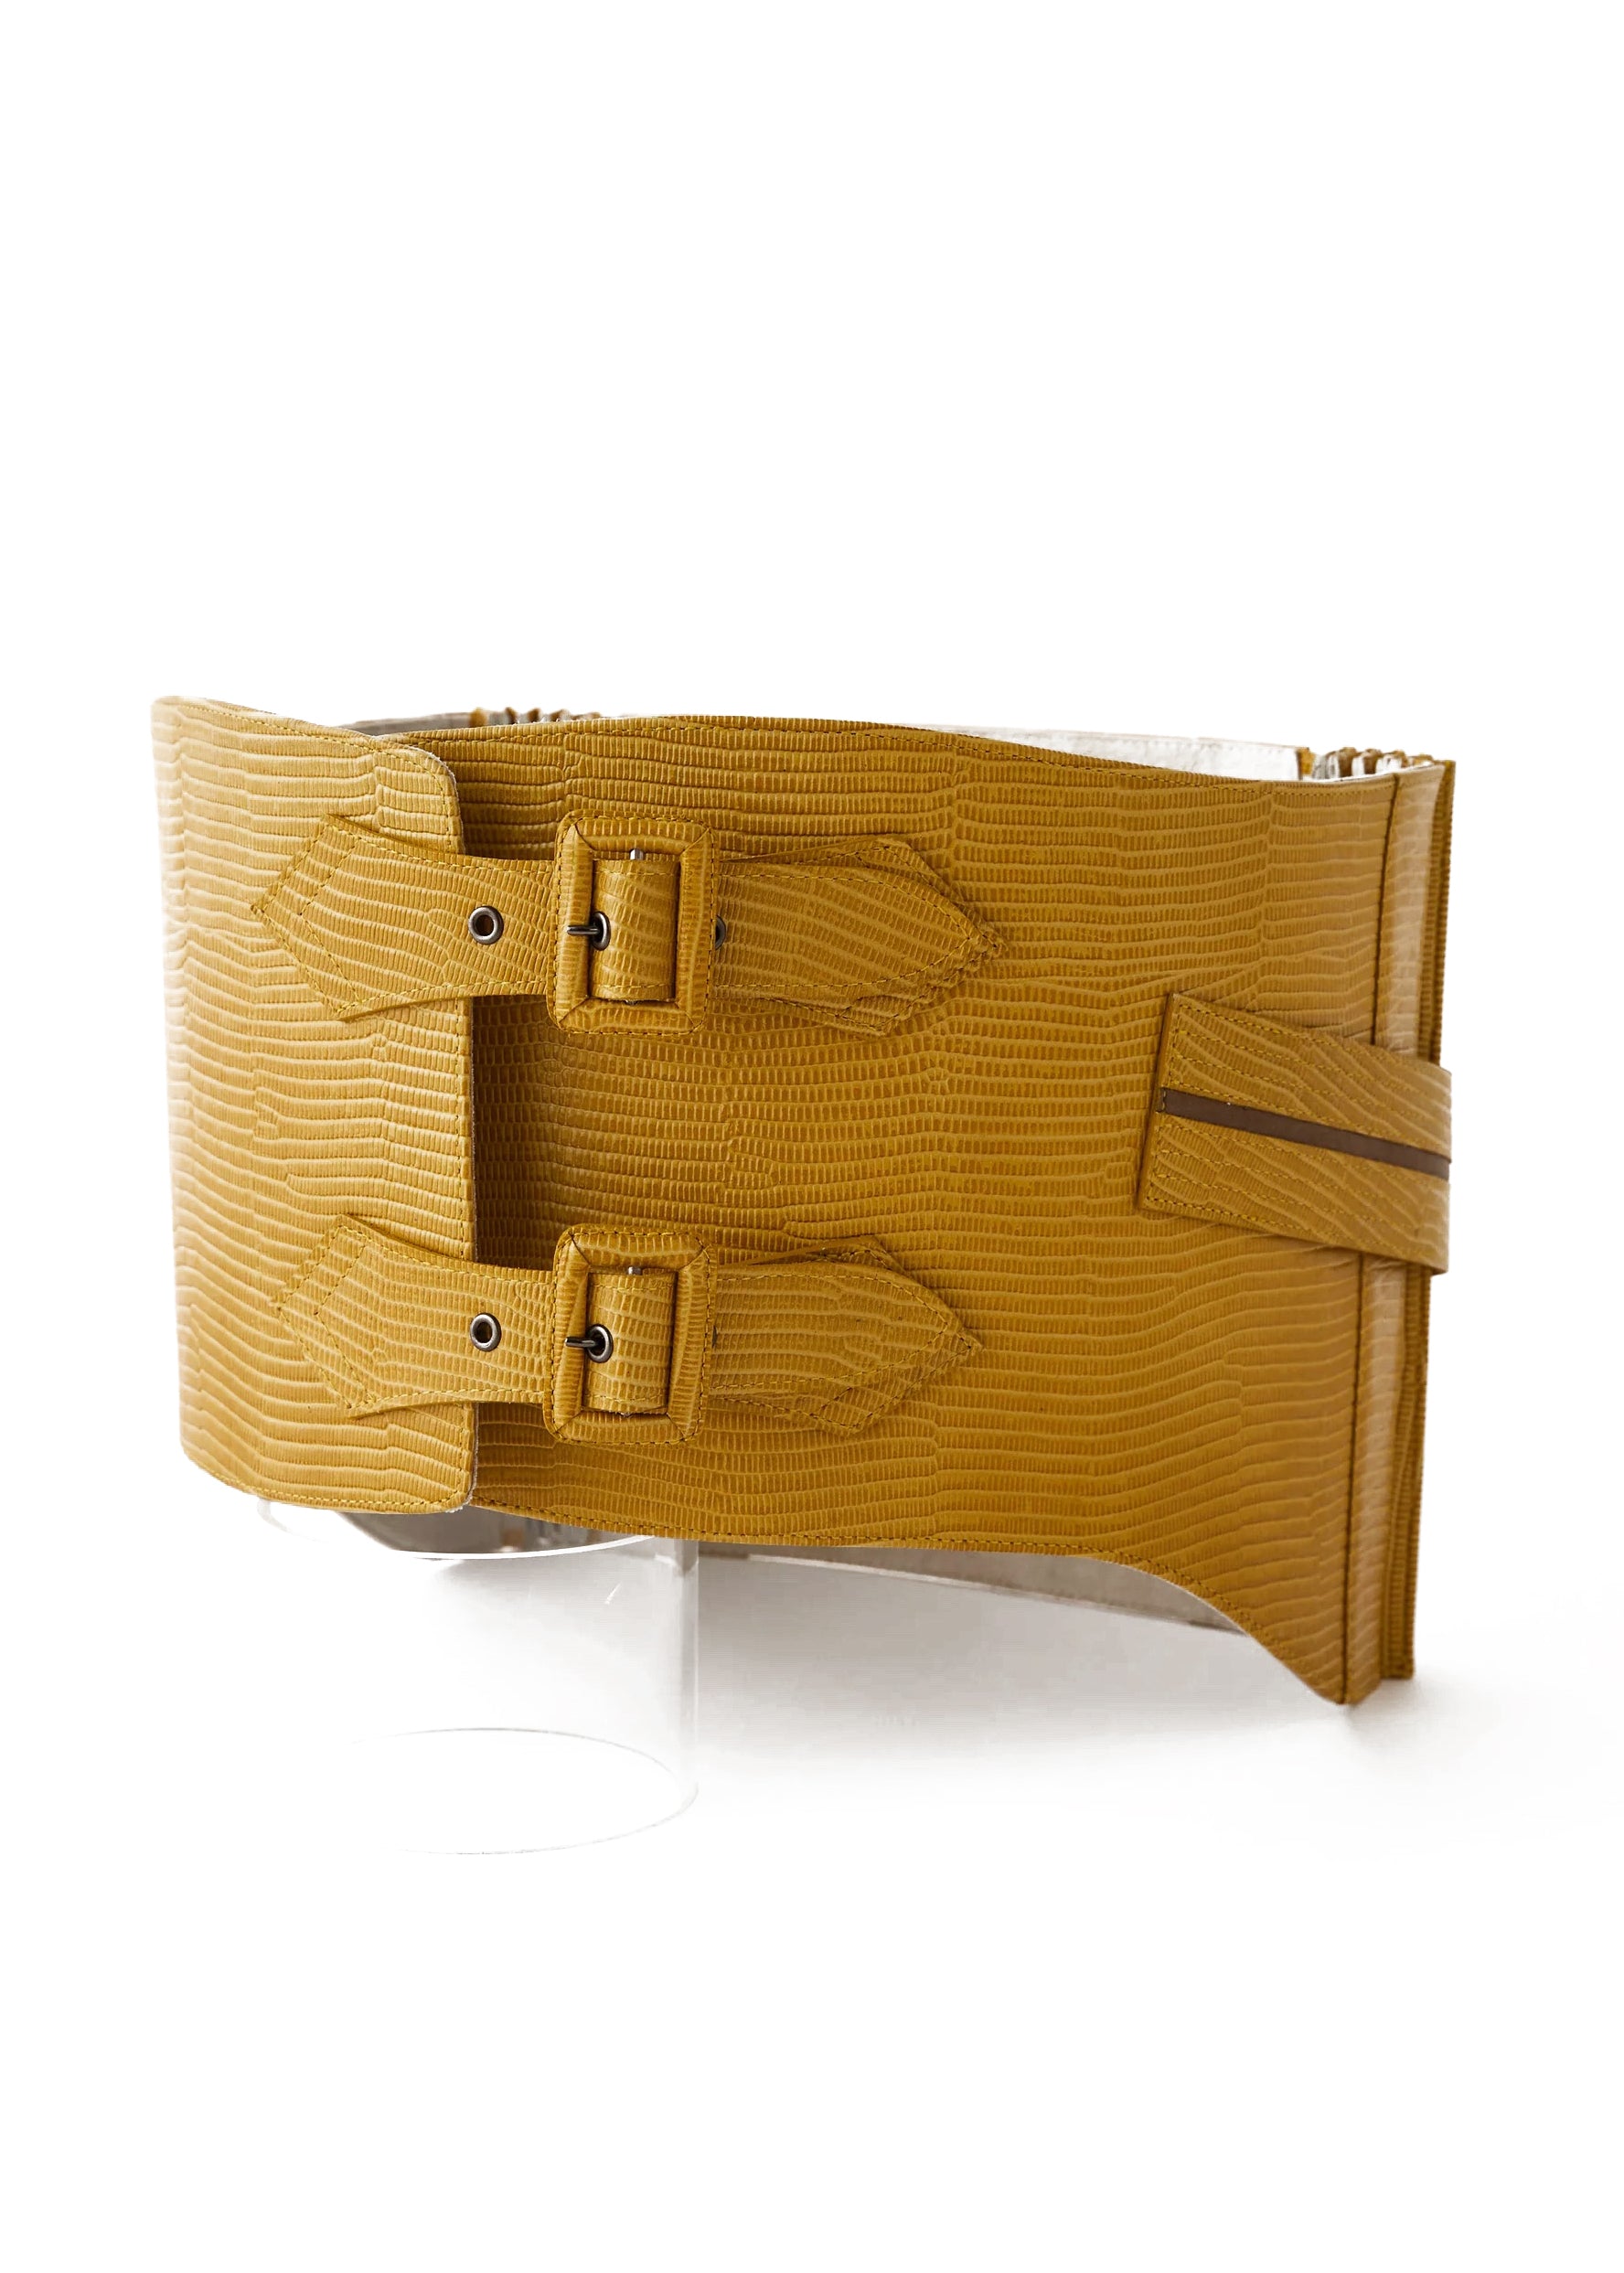 Obi Belt "Lizard Mustard" Leather [Immediate delivery available]